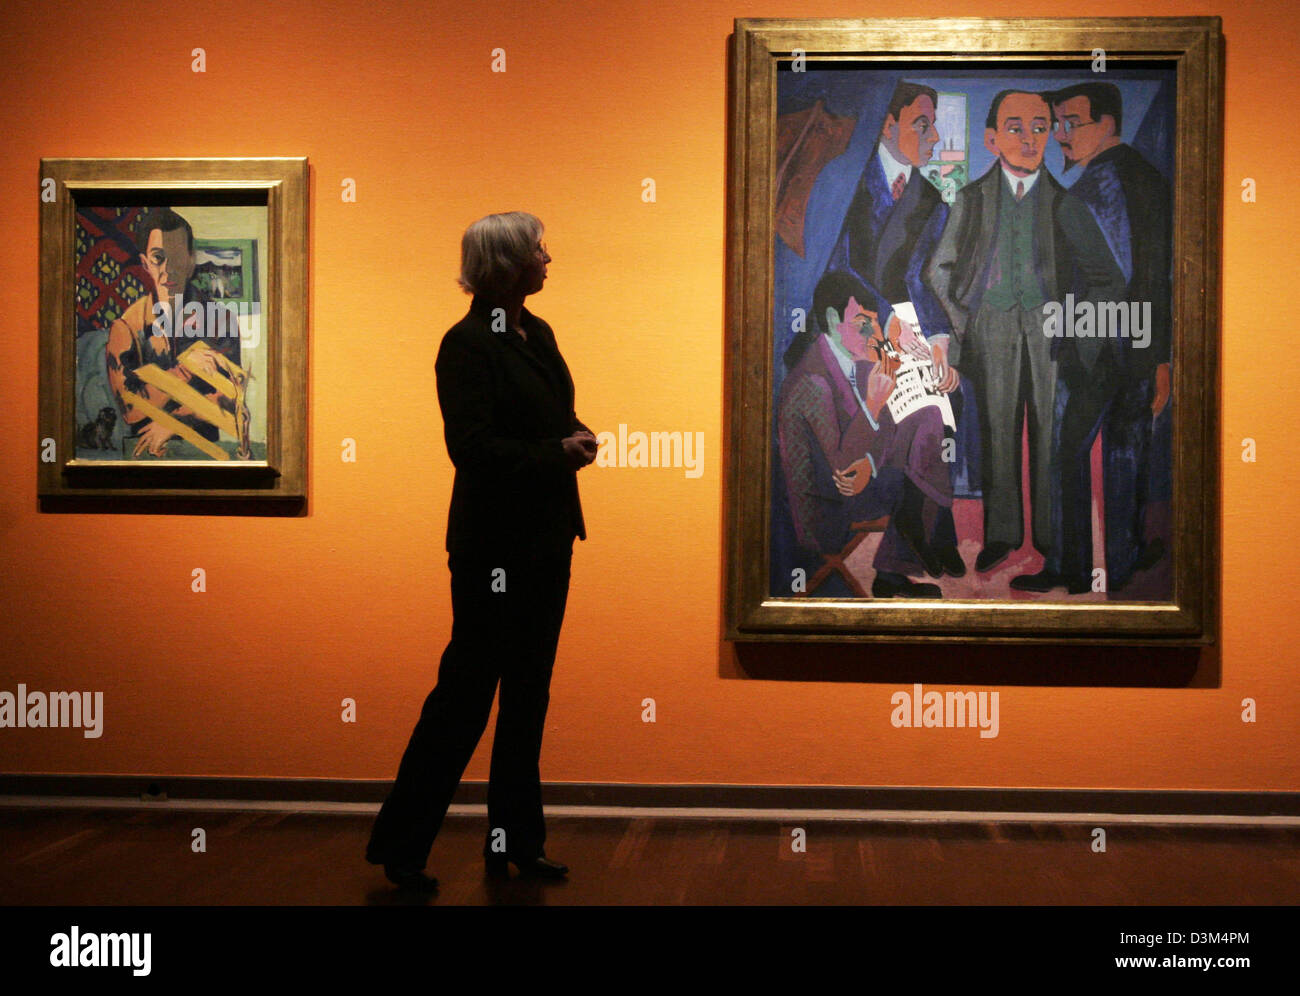 (dpa) - Exhibition curator Jutta Huelsewig-Johnen explains the exhibition's concept while standing between a self-portrait by Ernst Ludwig Kirchner (1935-37, L) and his painting 'An artist group: Mueller, Kirchner, Heckel, Schmidt-Rotluff' (circa 1926) during a press preview at the Kunsthalle (art hall) in Bielefeld, Germany, 17 November 2005. Paintings, drawings and graphics by th Stock Photo